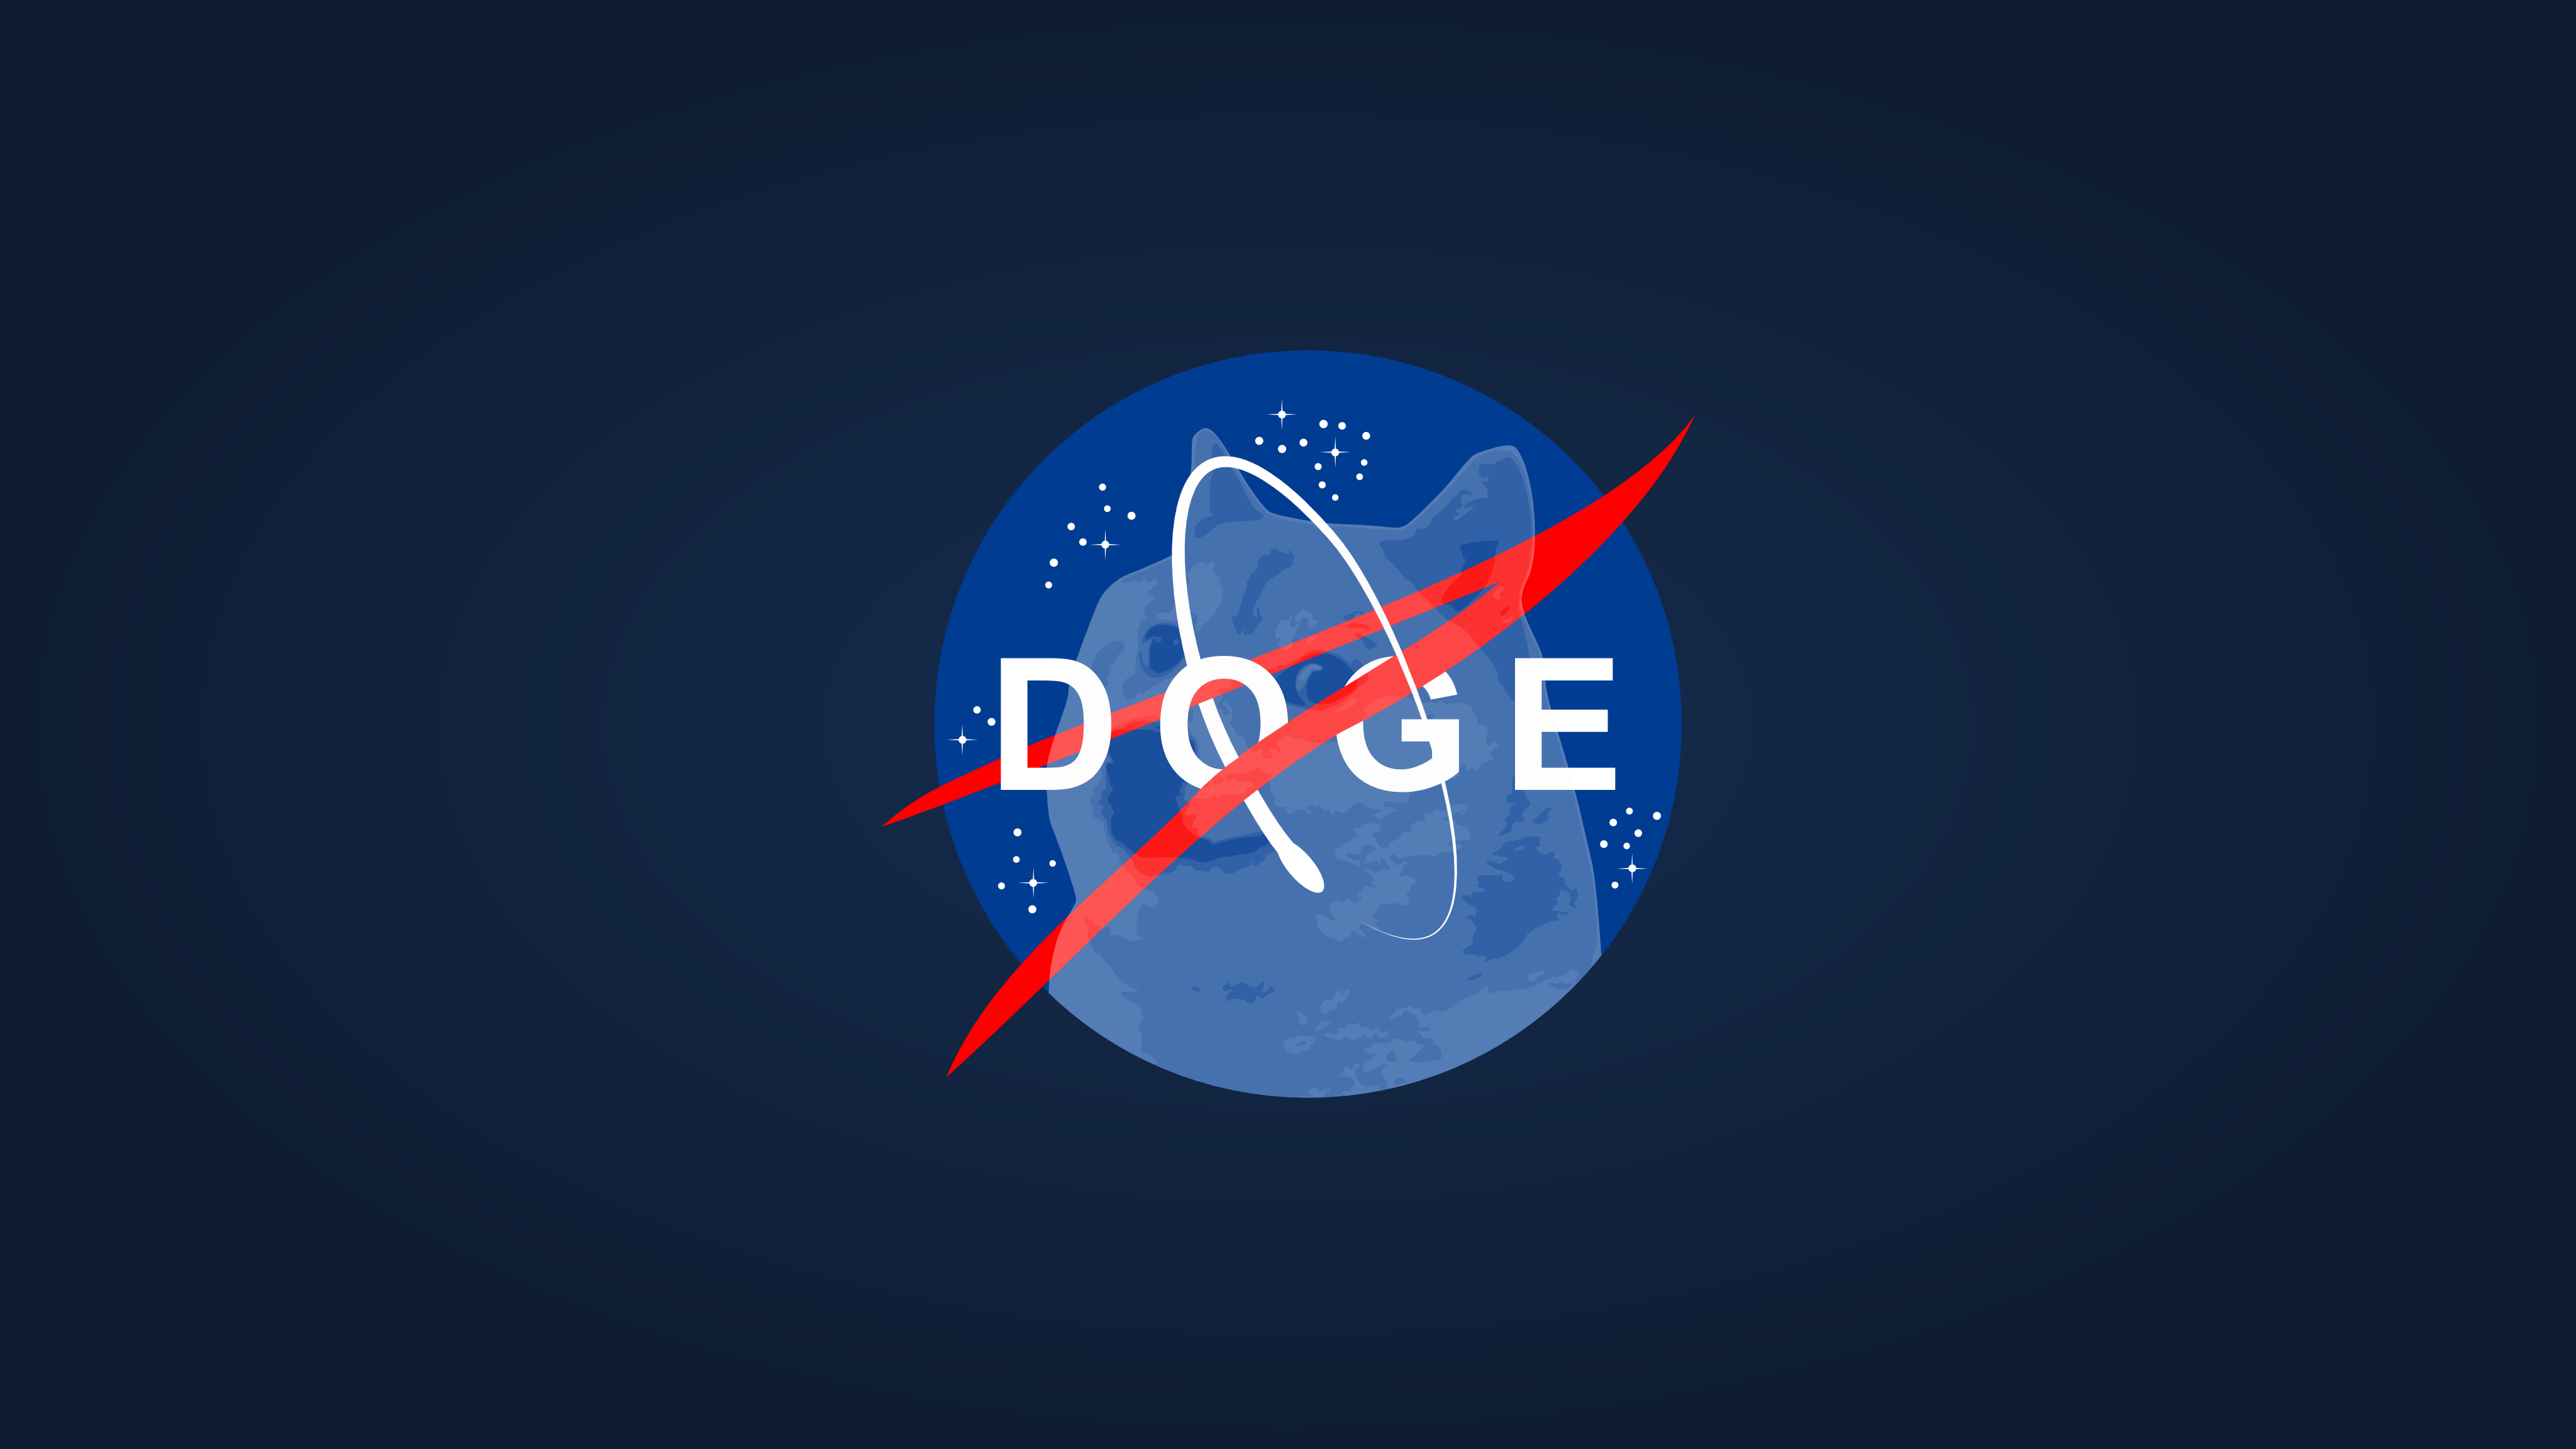  Dogenautics and Space Administration To the moon [4k] dogecoin